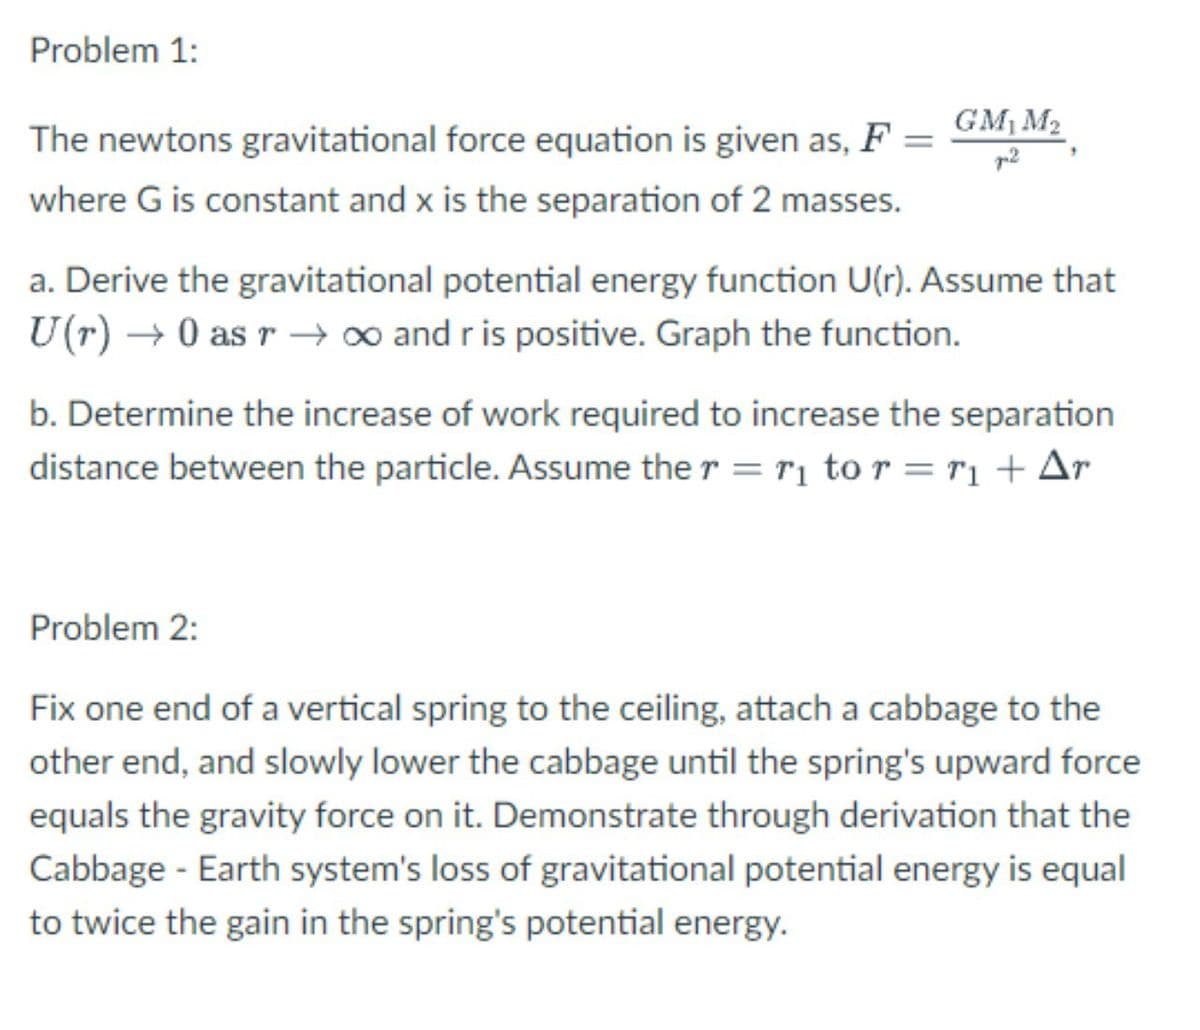 Problem 1:
The newtons gravitational force equation is given as, F =
GM M2
where G is constant and x is the separation of 2 masses.
a. Derive the gravitational potential energy function U(r). Assume that
U(r) → 0 as r –→o and r is positive. Graph the function.
b. Determine the increase of work required to increase the separation
distance between the particle. Assume the r = r1 to r = r1 + Ar
Problem 2:
Fix one end of a vertical spring to the ceiling, attach a cabbage to the
other end, and slowly lower the cabbage until the spring's upward force
equals the gravity force on it. Demonstrate through derivation that the
Cabbage - Earth system's loss of gravitational potential energy is equal
to twice the gain in the spring's potential energy.
